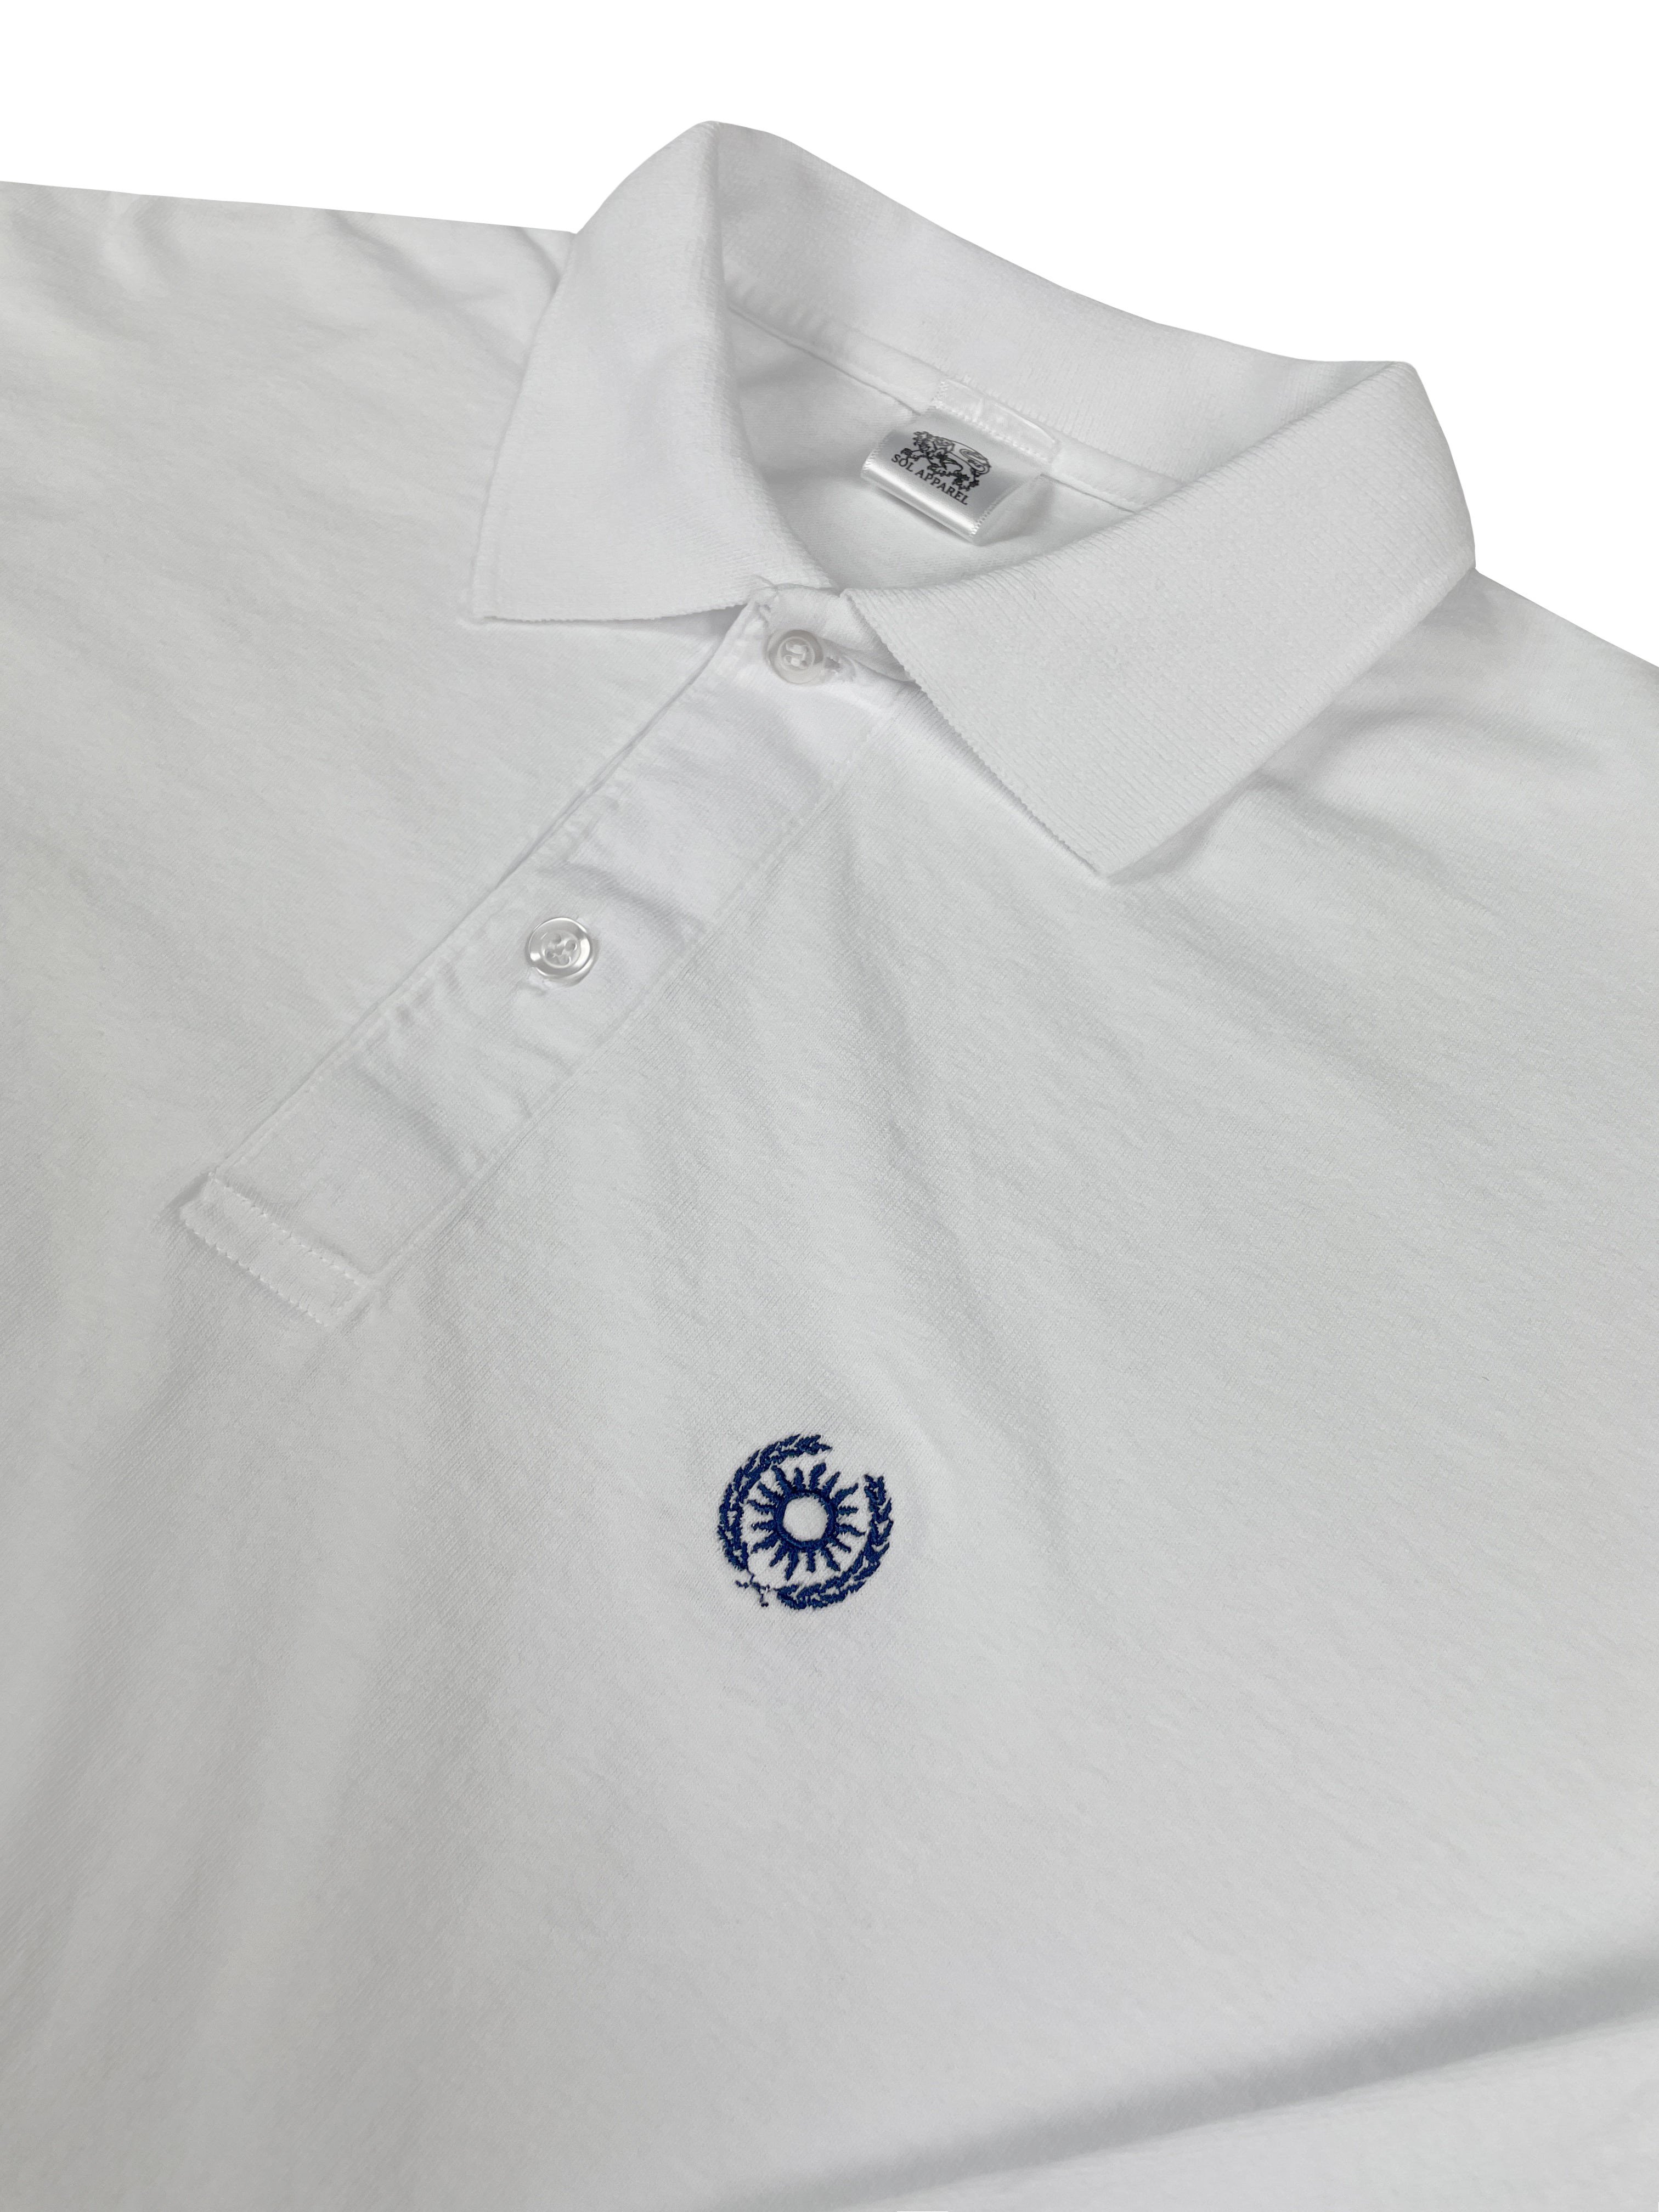 close up of white polo tshirt for men with blue sun and laurels embroidered on the left chest